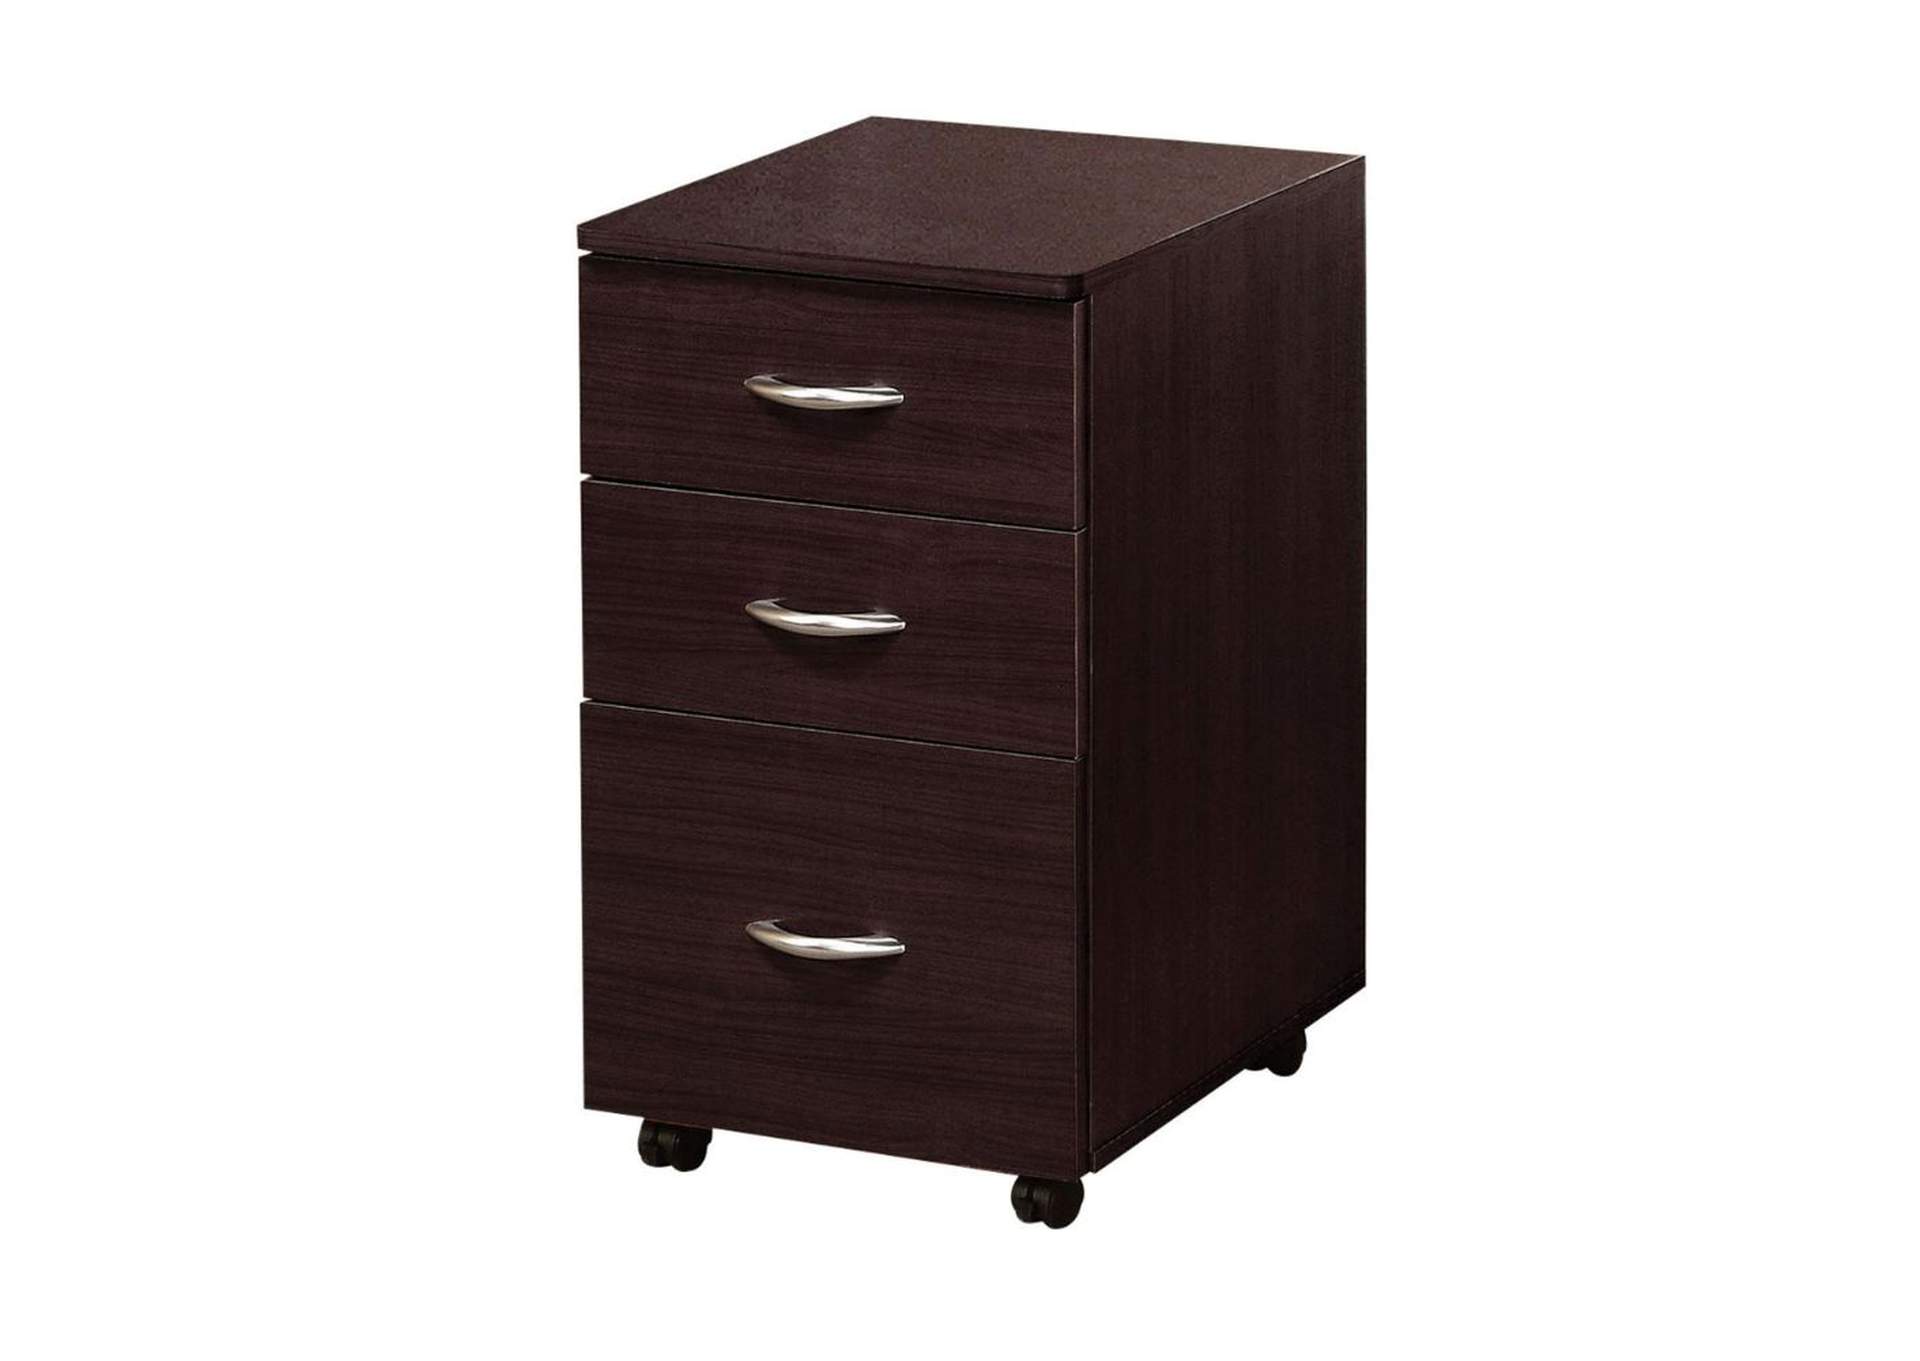 Marlow File Cabinet,Acme